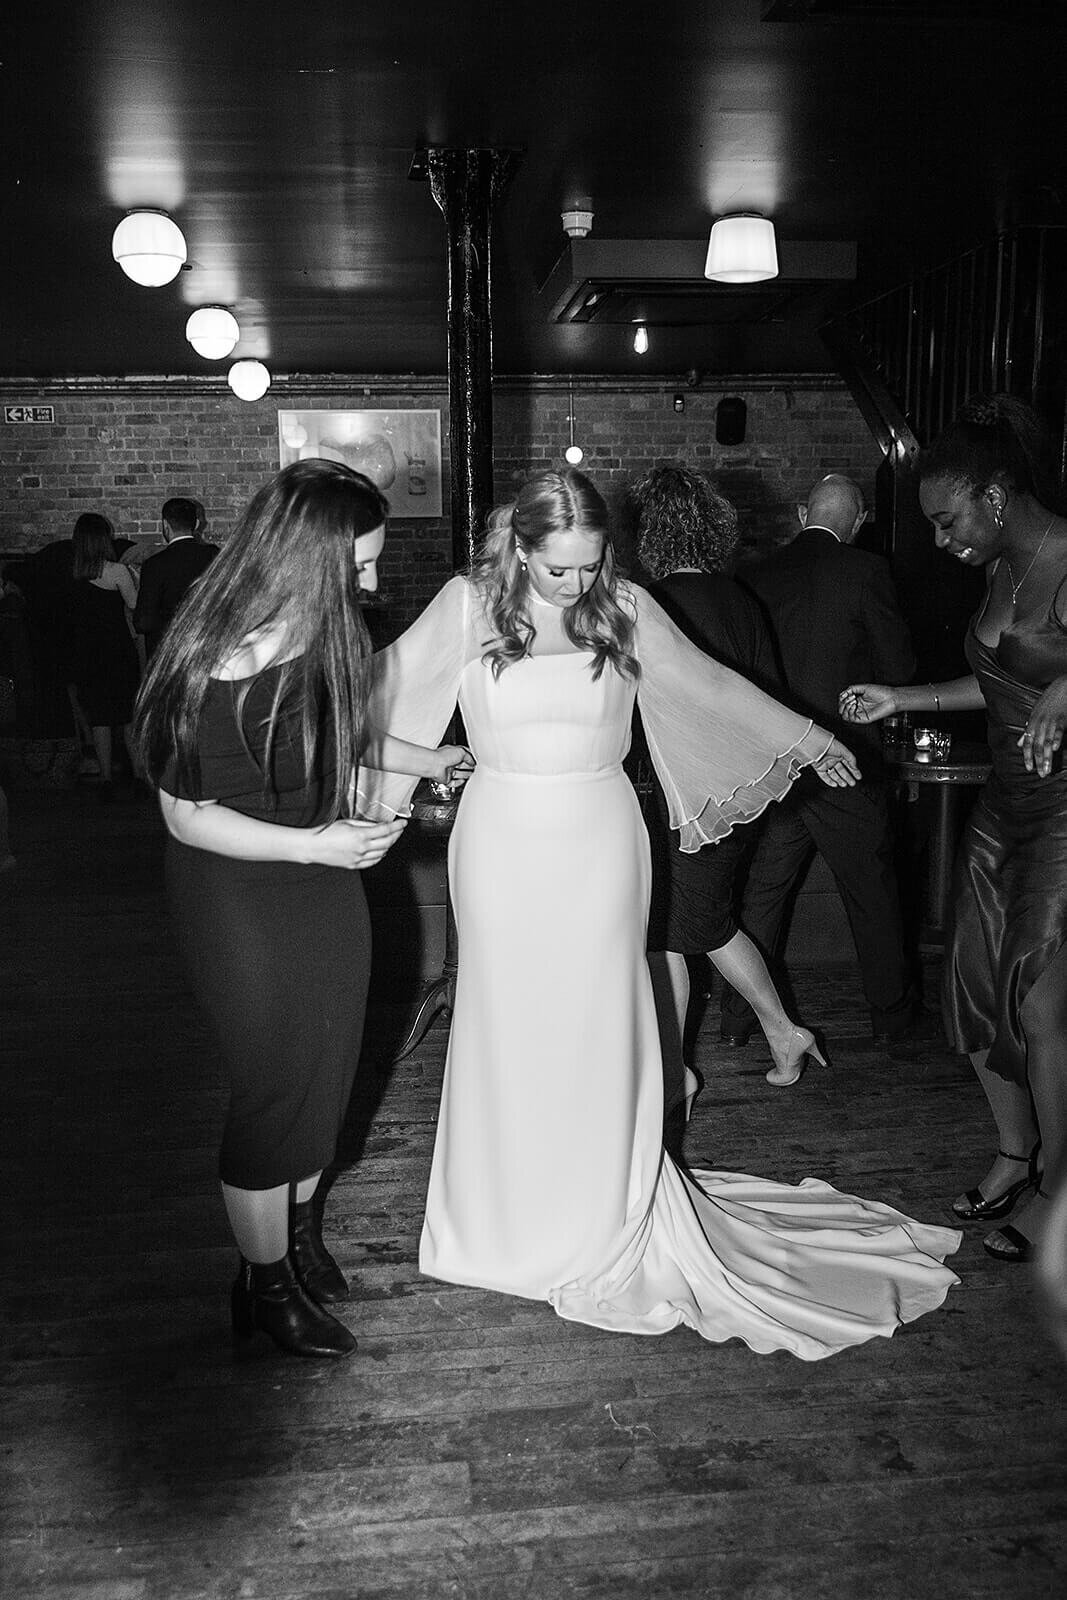 Bride looking at her dress on dancefloor at Coin Laundry London wedding reception